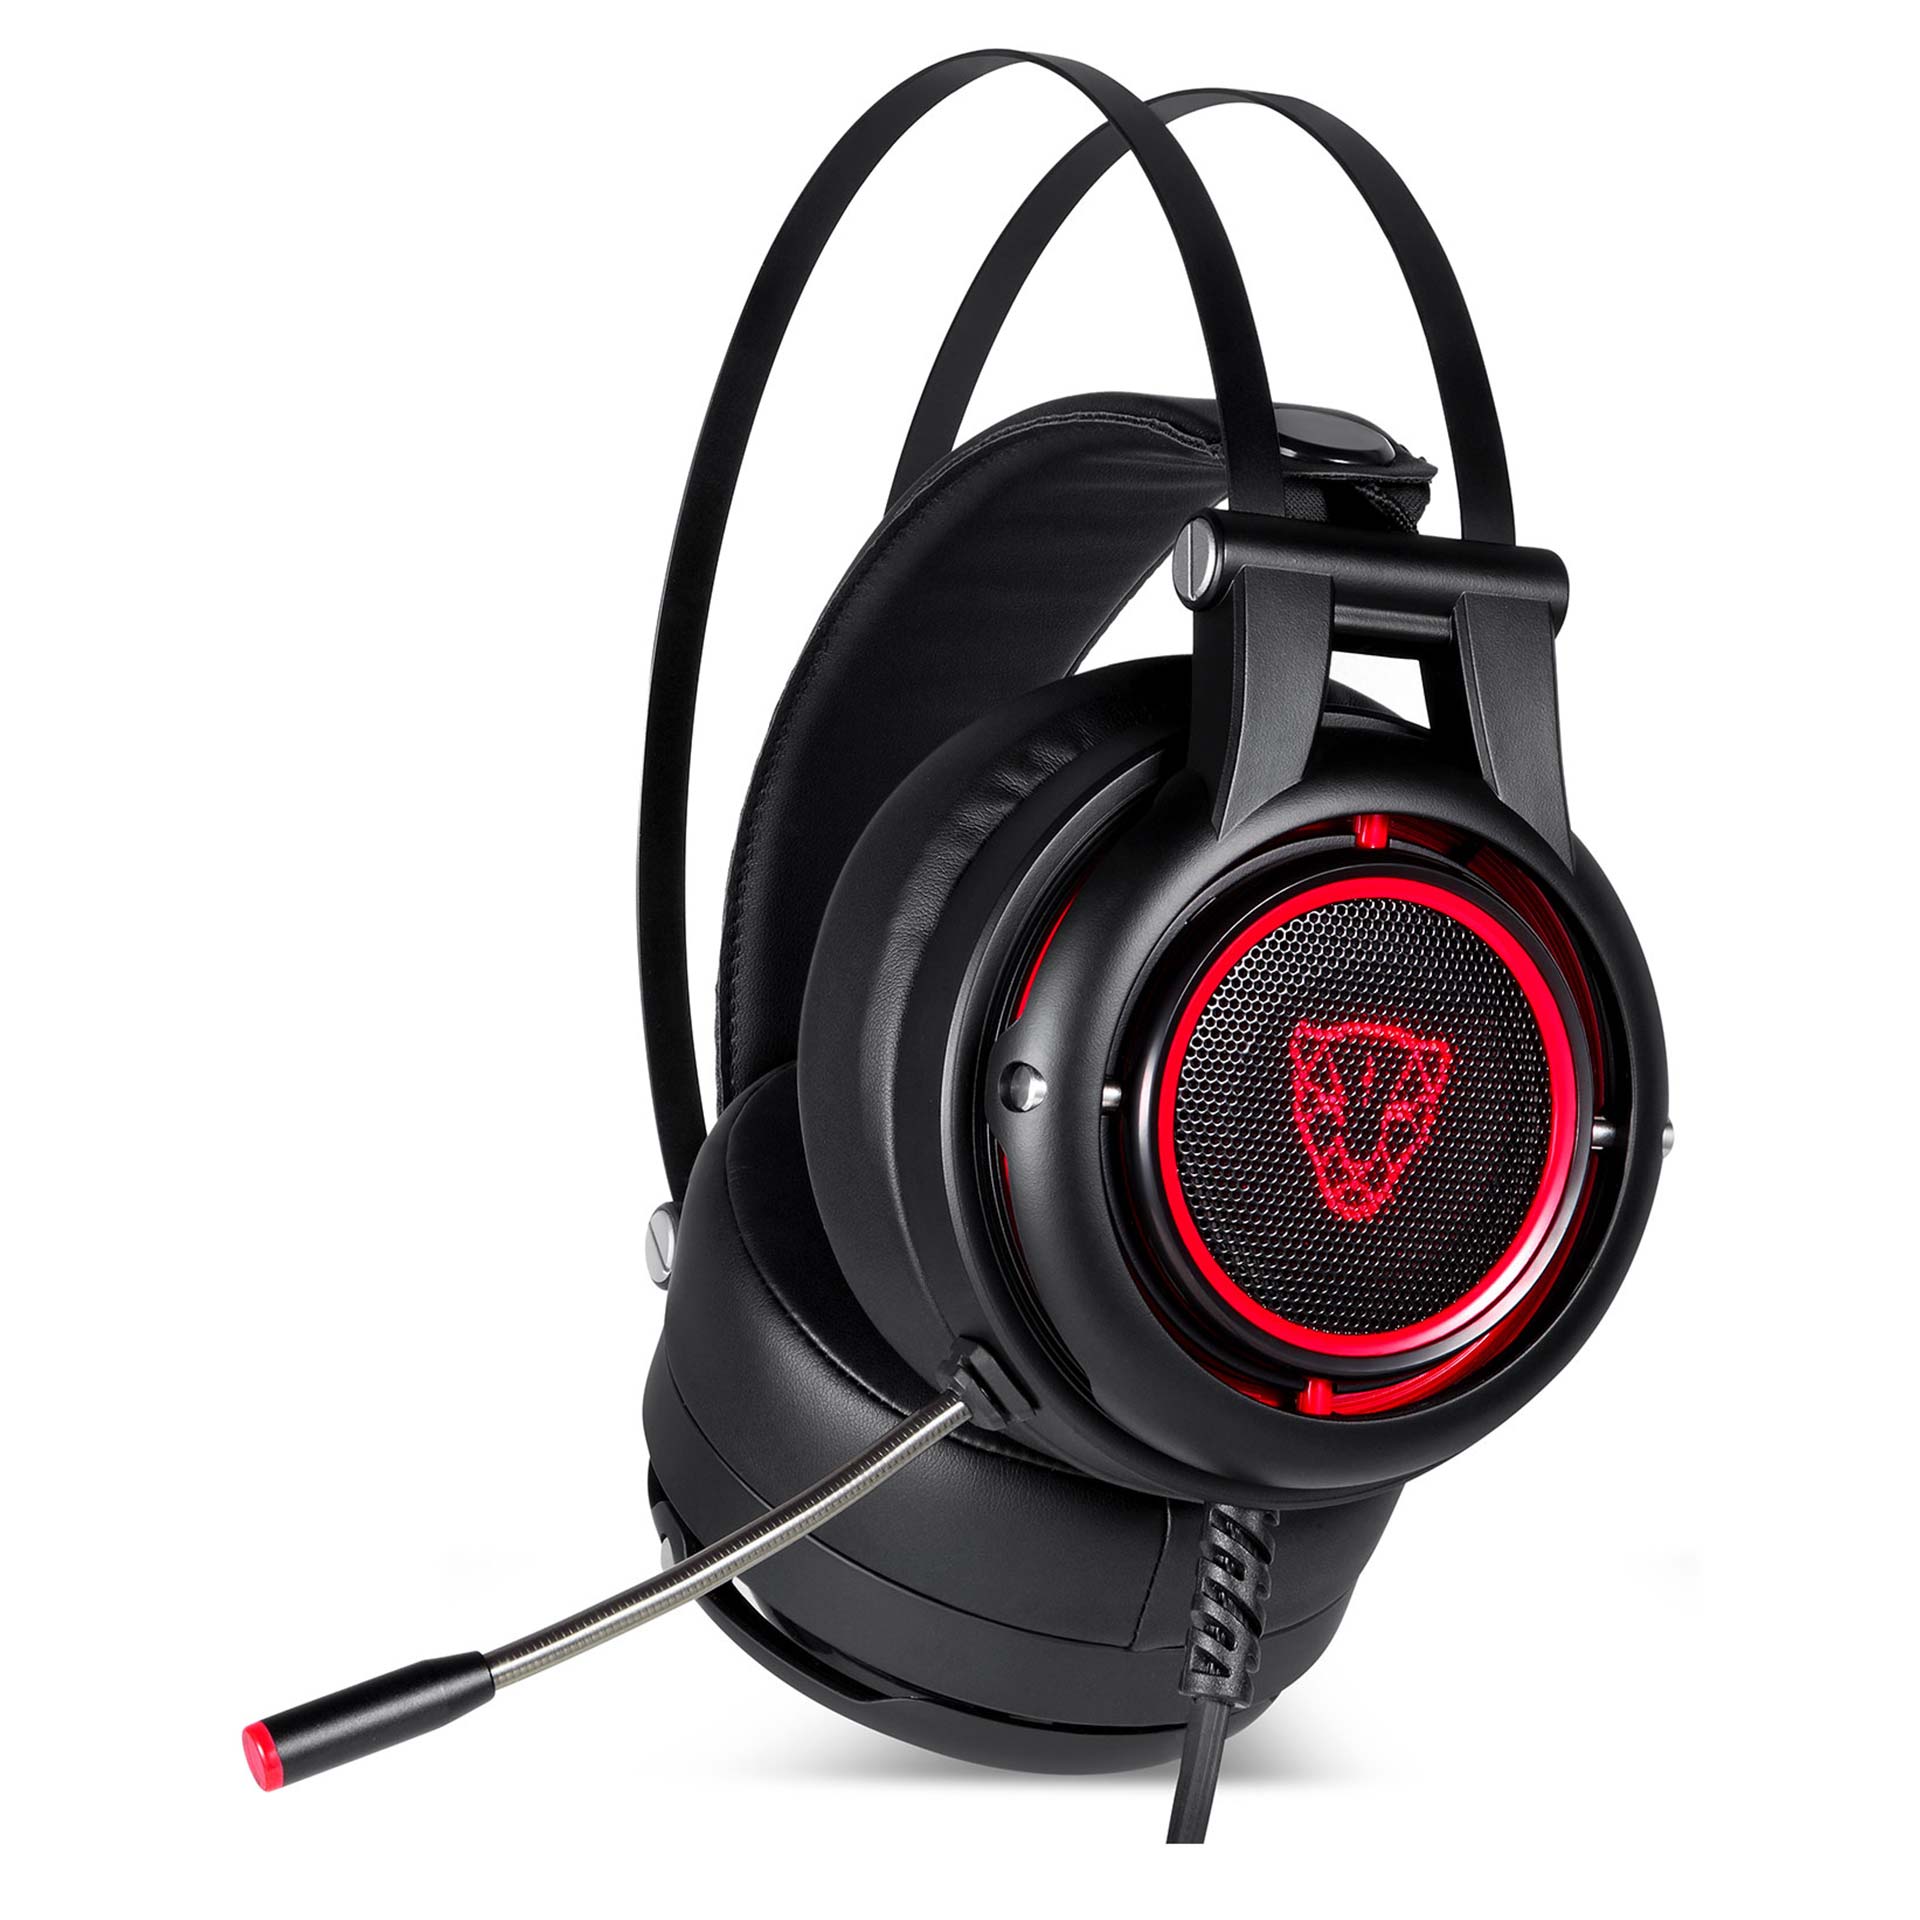 Official MOTOSPEED Stereo Gaming Headset H18